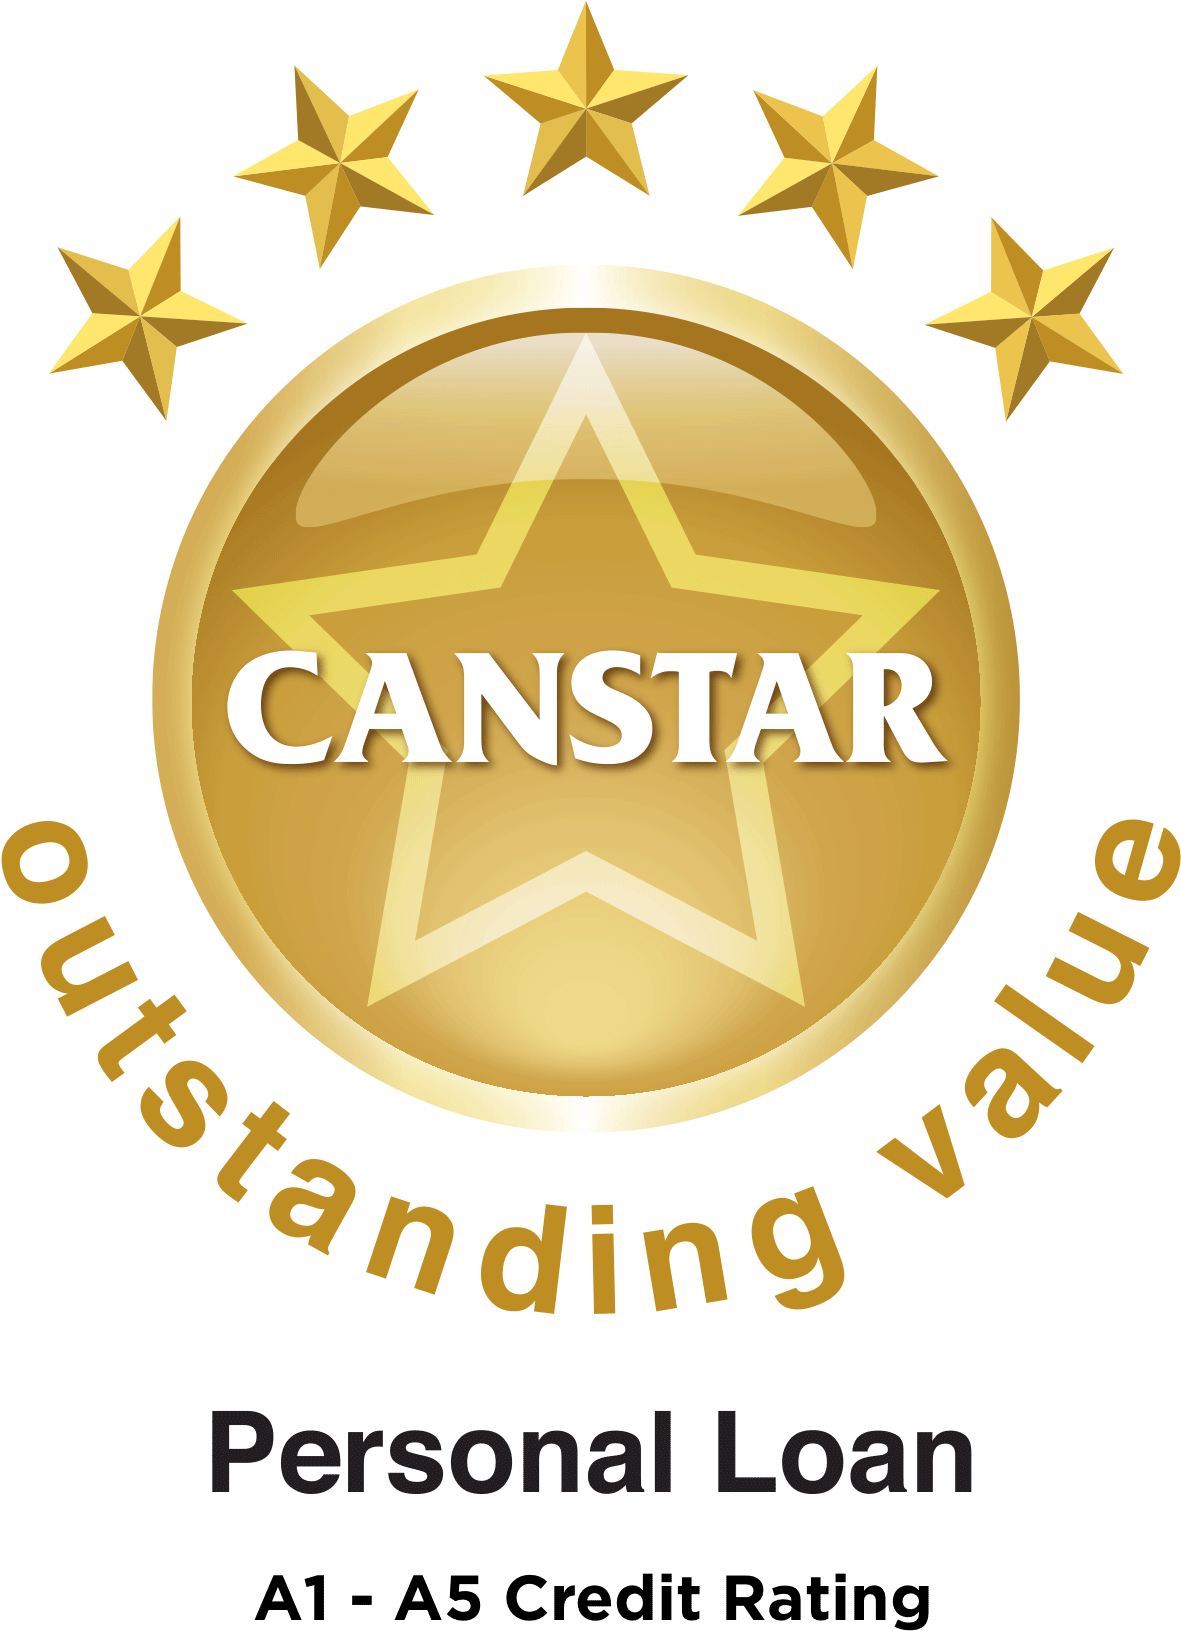 5 Star Rating For Outstanding Value From Canstar - Miele C3 Family All Rounder Vacuum Cleaner: Ivory White (1182x1667)